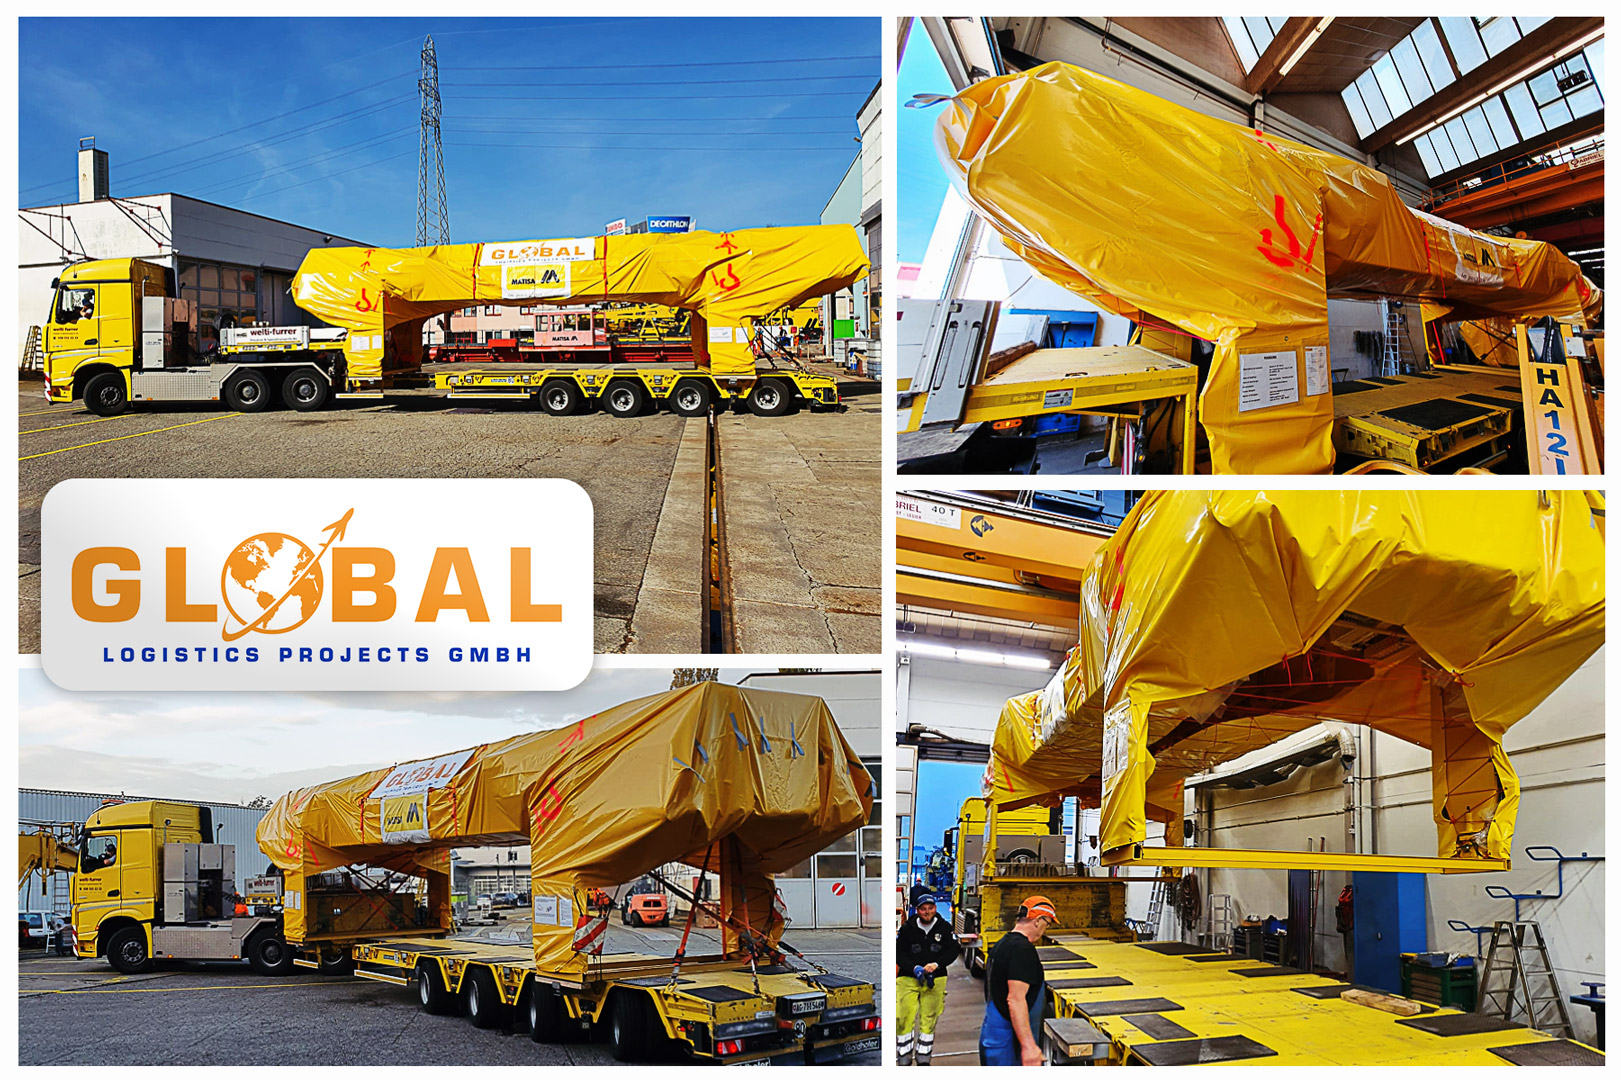 Global Logistics Projects Handling 2 of 6 Tamping Machines ex-Switzerland for Rio De Janeiro